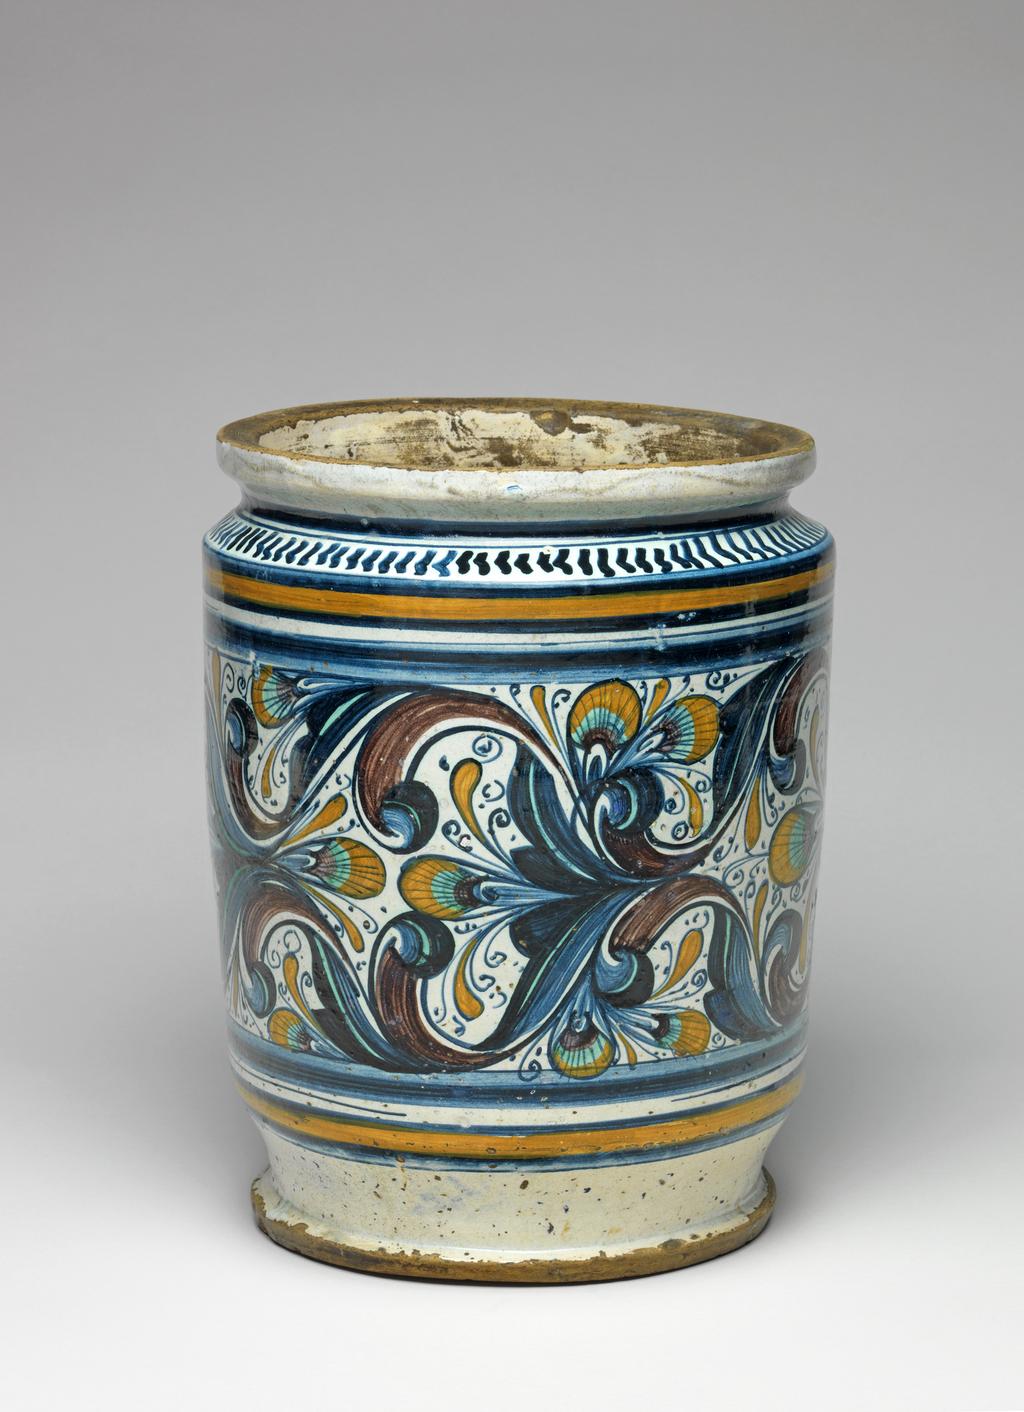 An image of Maiolica. Pharmacy jar/albarello. Unidentified Pesaro potter, The Marches. Broad albarello with straight sides. On the front, in a contour panel with three lobes on each side, are profile busts of a man and woman wearing contemporary costume, facing inwards towards a vase of pinks, with groups of three dots in the background. The rest of the main field is decorated with gothic foliage and peacock's feather eye motifs. Above and below there is a wide blue band and a dark yellow band between two blue; on the shoulder, a row of blue chevrons with a horizontal blue band above. `4S758' is incised into the base. Buff earthenware, tin-glazed on the exterior and more thinly on the interior; base and outer edge of base unglazed. Painted in dark blue, green, dark yellow, and manganese-purple. Height, whole, 26.9 cm, diameter, rim, 20.0 cm, diameter, base, 17.3 cm, diameter, whole, 21.2 cm, circa 1470-1480. Renaissance.